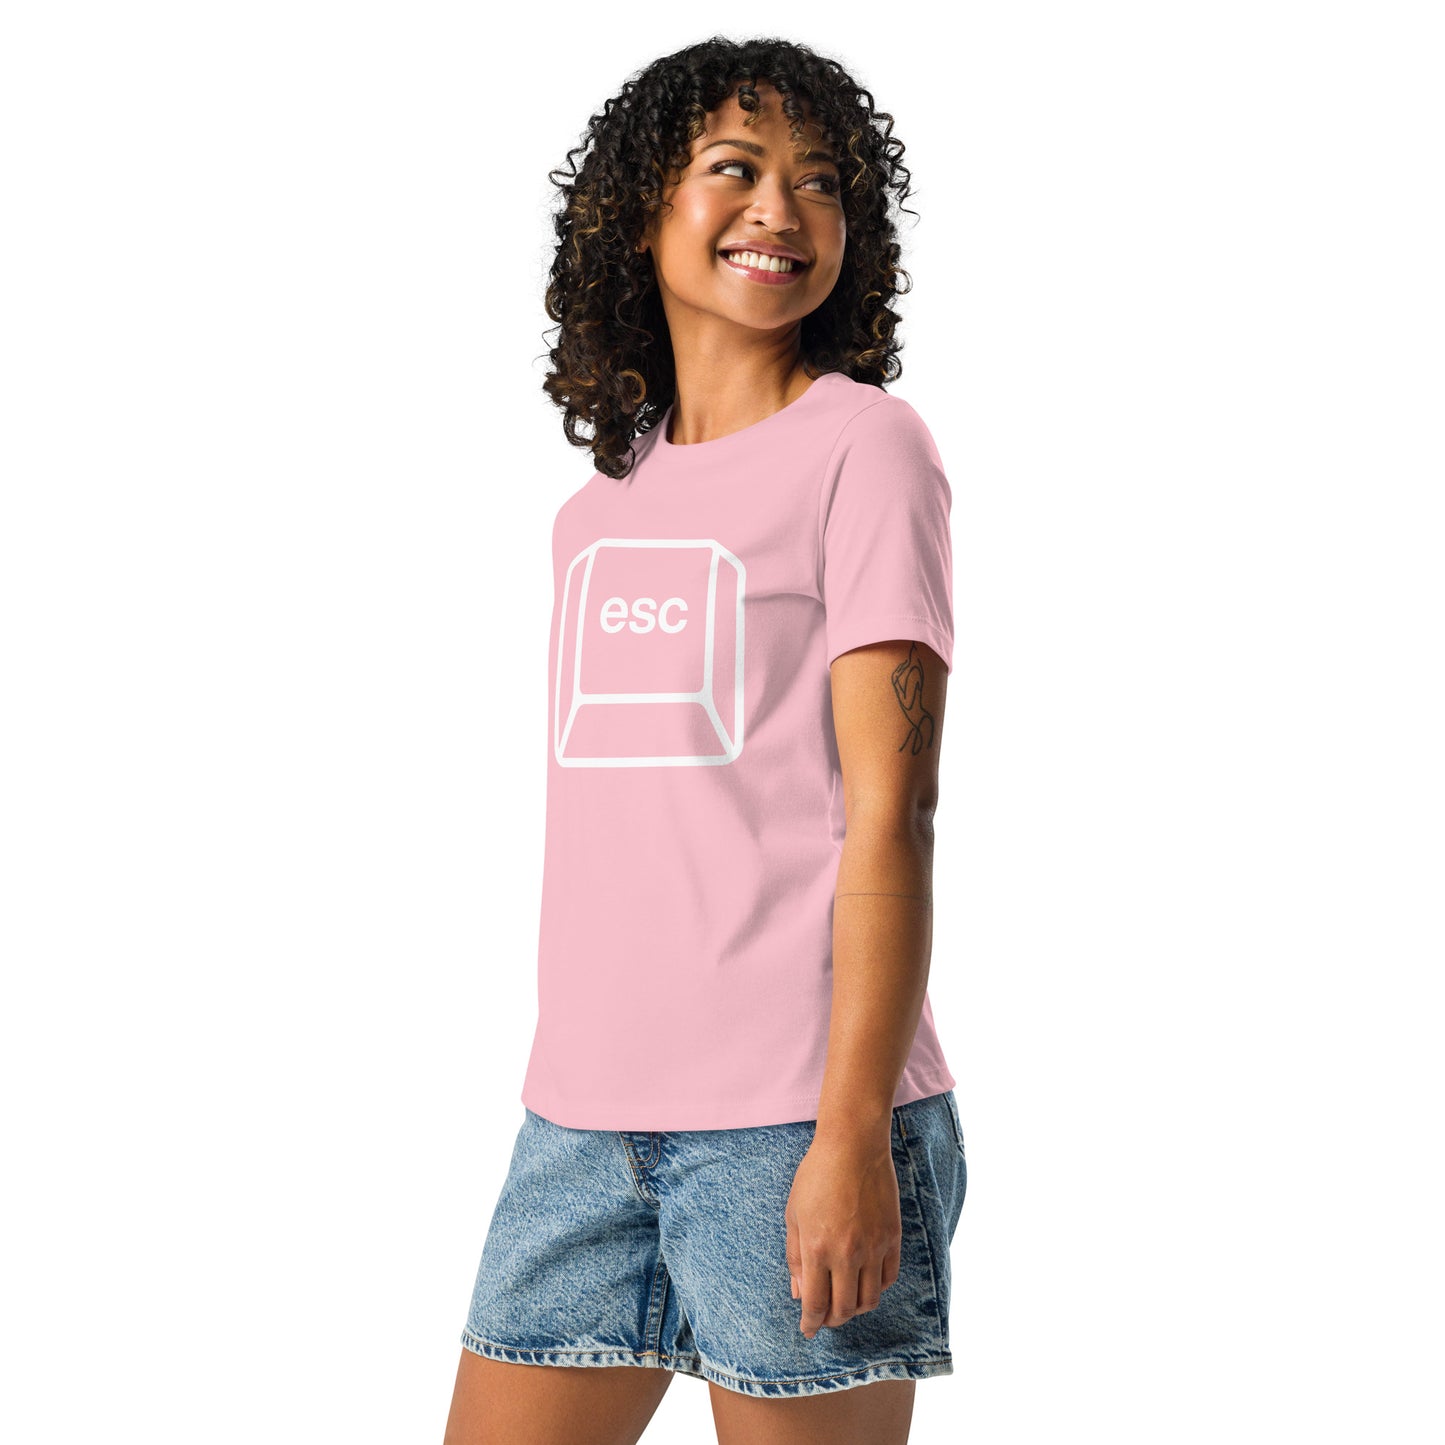 Woman with pink t-shirt with picture of esc key